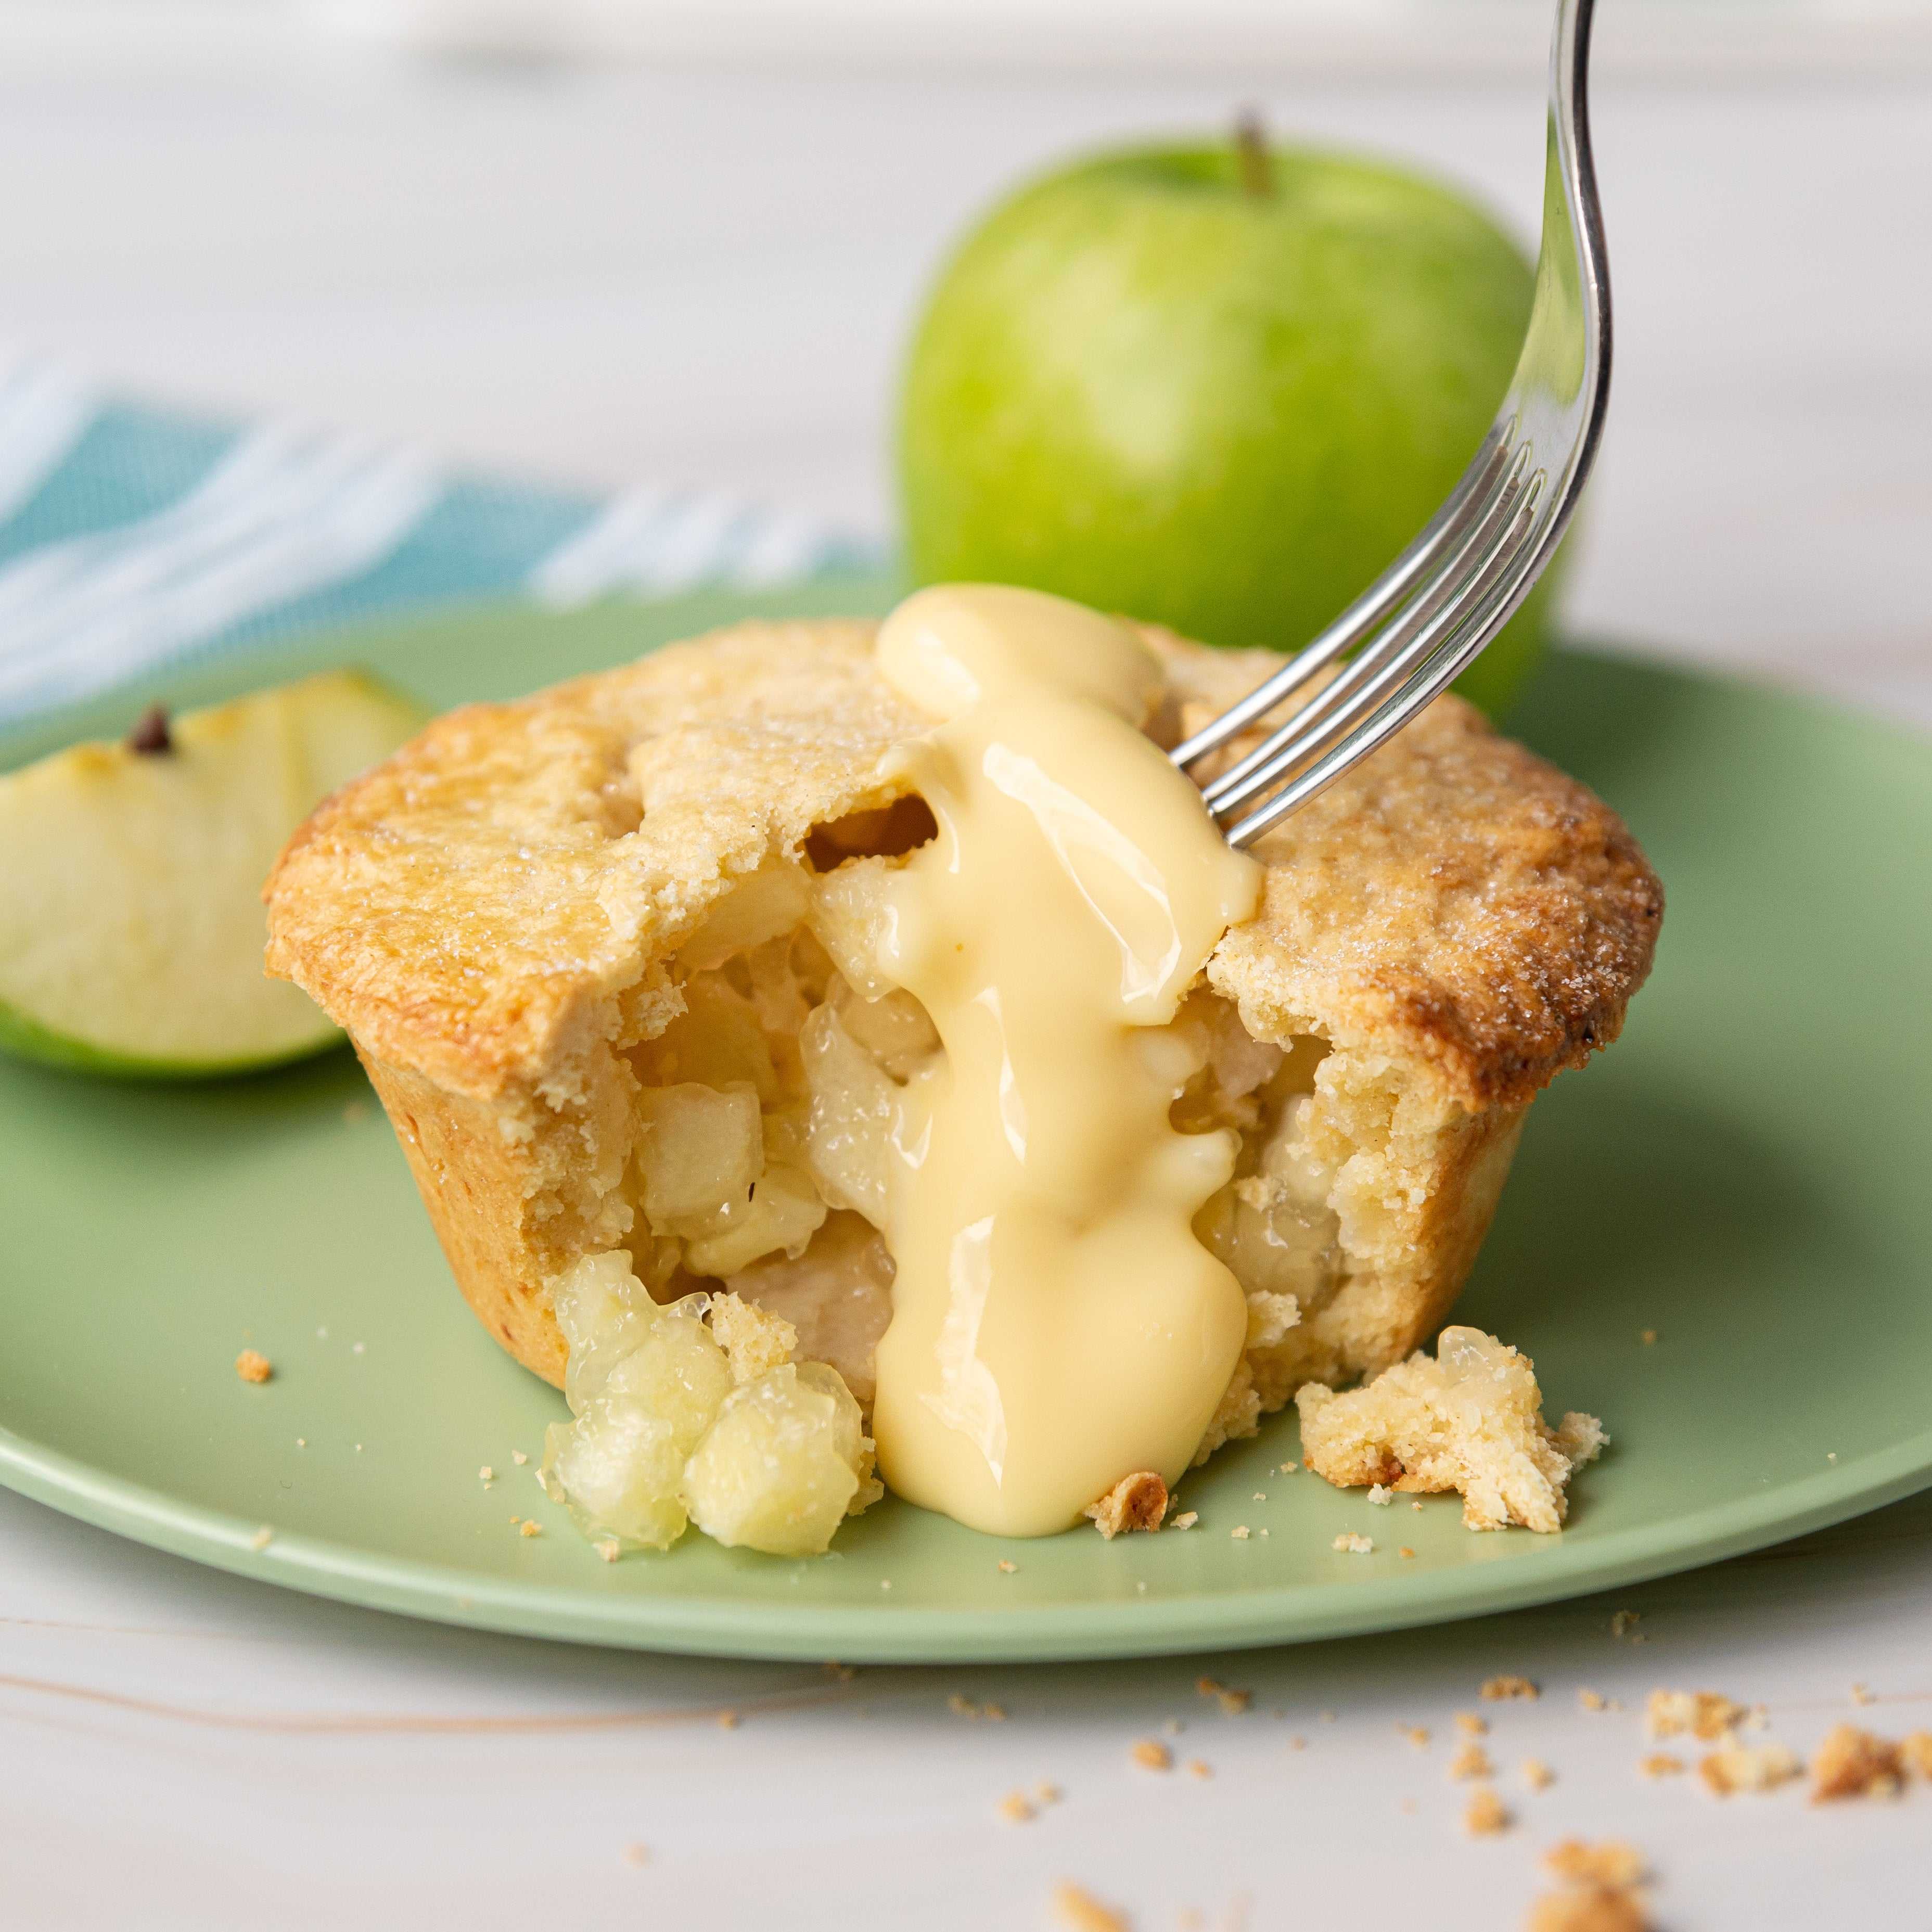 Apple Pie with Cheddar Cheese Crust (Serves 2)